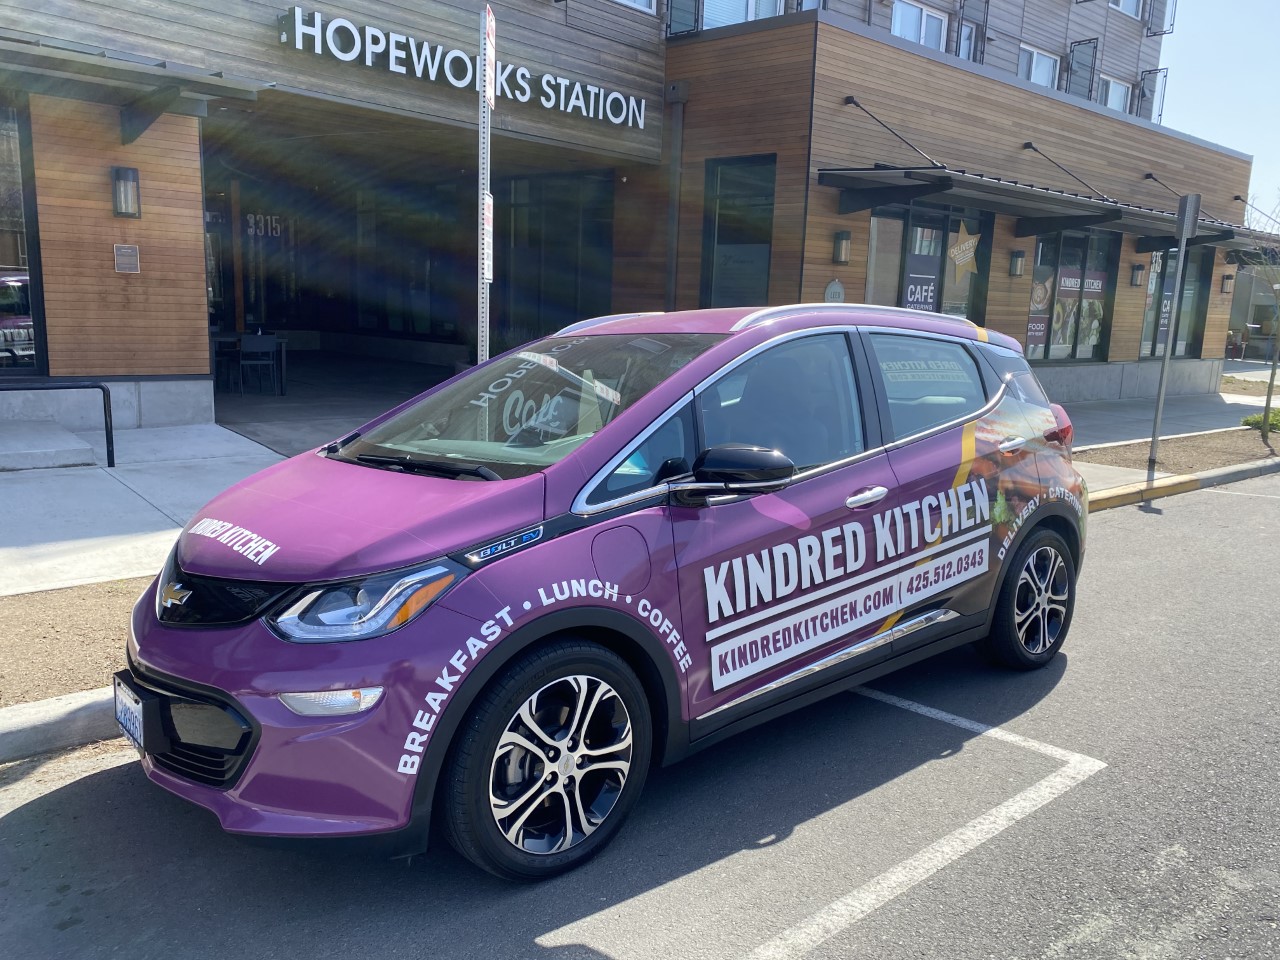 Photo of a purple Chevy Bolt EV with Kindred Kitchen vinyls, parked outside on the street.